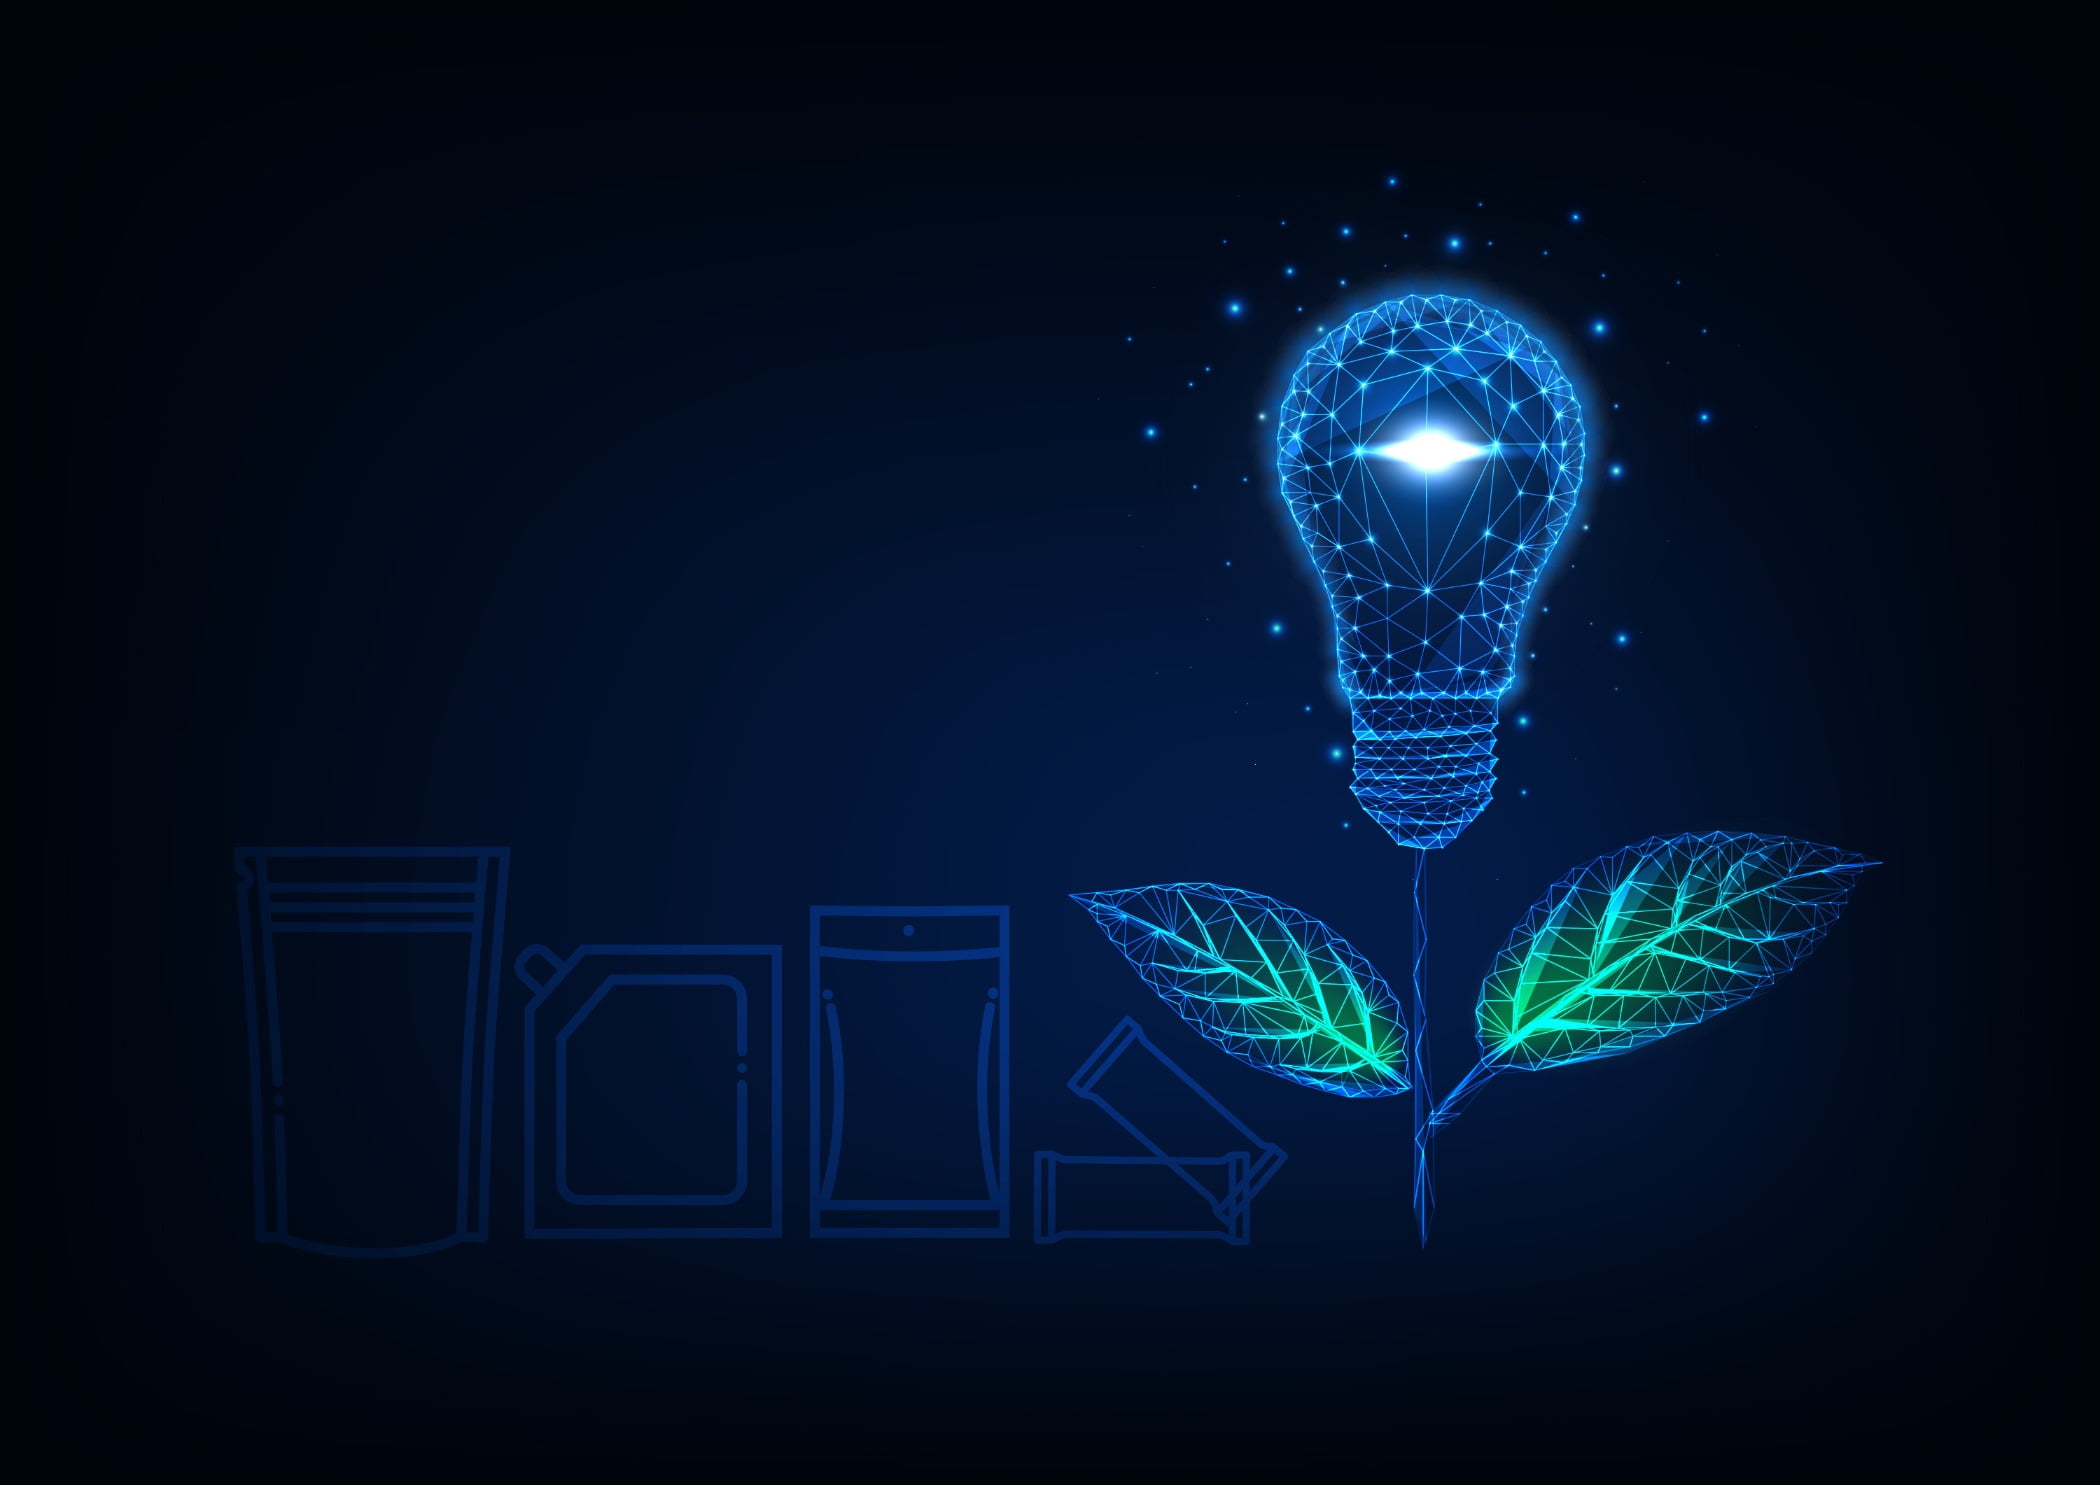 Sustainable energy concept. Futuristic glowing low poly flower made of light bulb and green leaves, along with flexible packages along the bottom of the image.